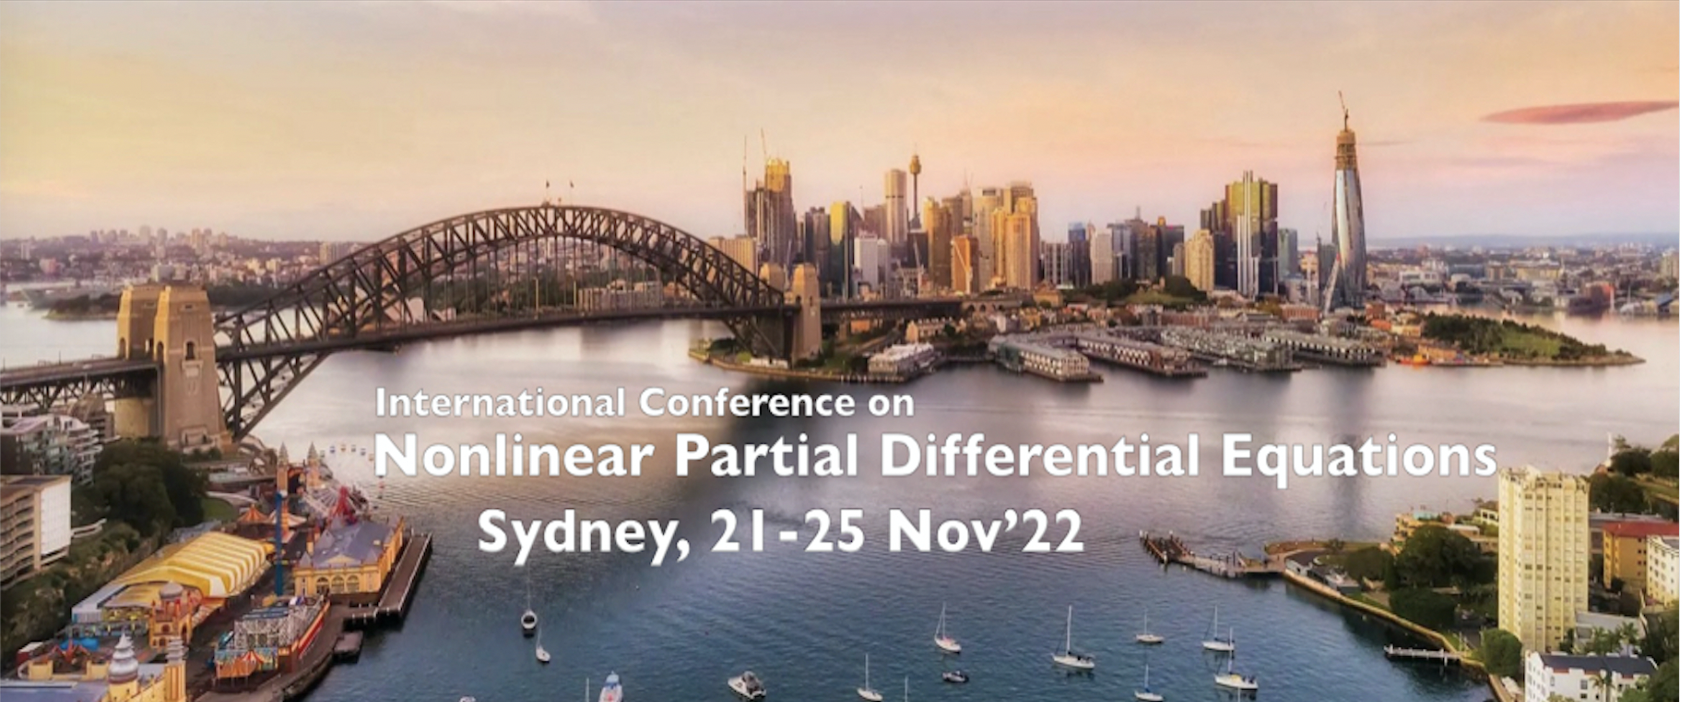 International Conference on Nonlinear Partial Differential Equations 2022